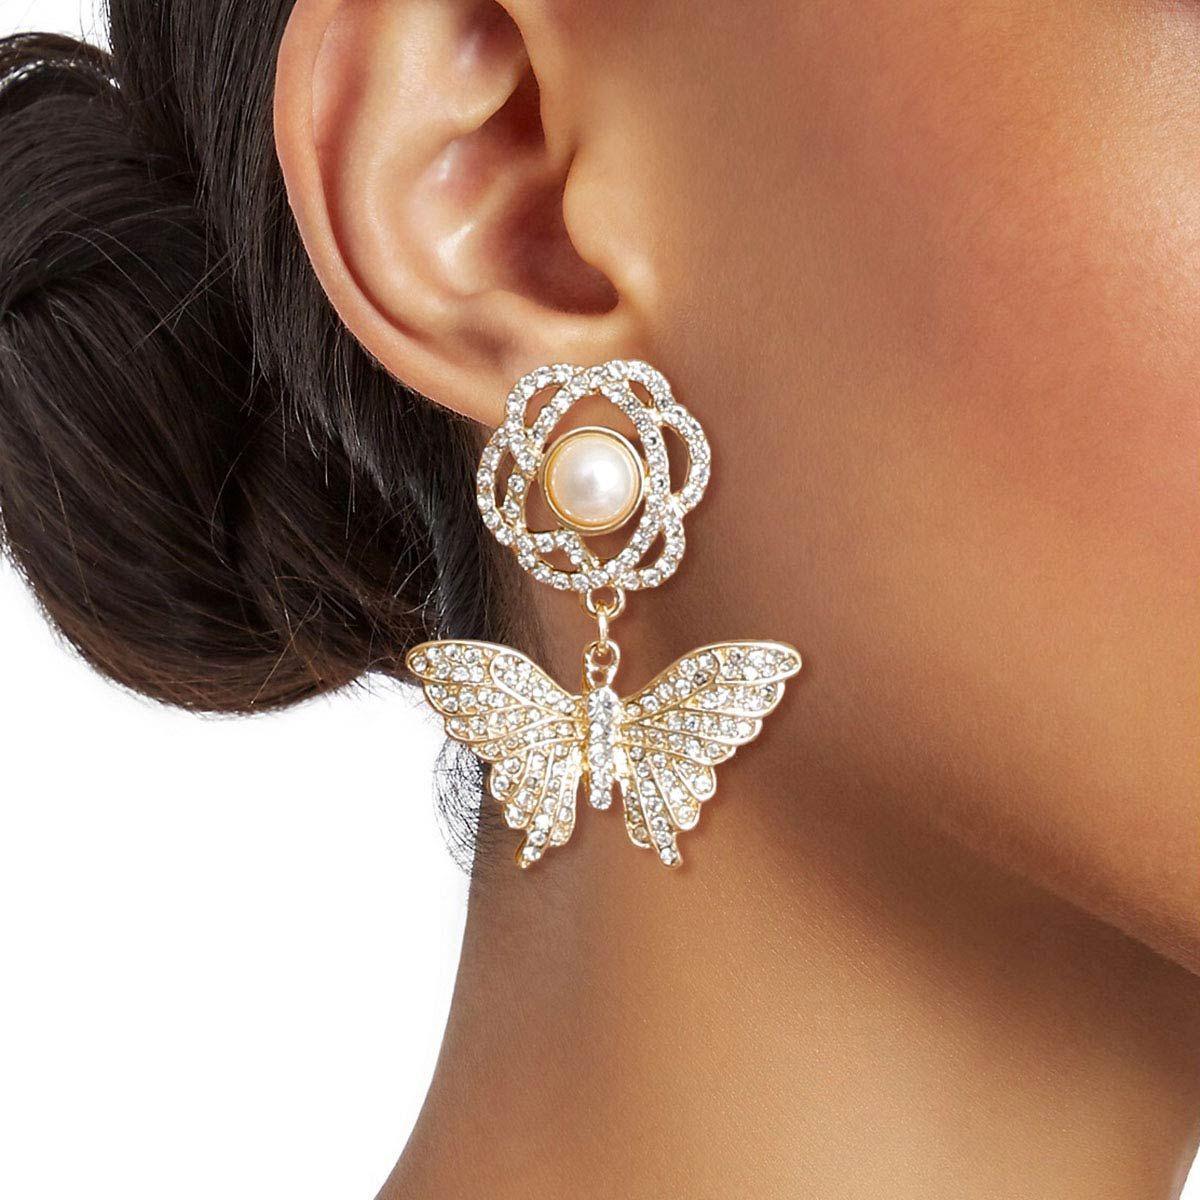 Unique Gold Butterfly Earrings to Revamp Your Style